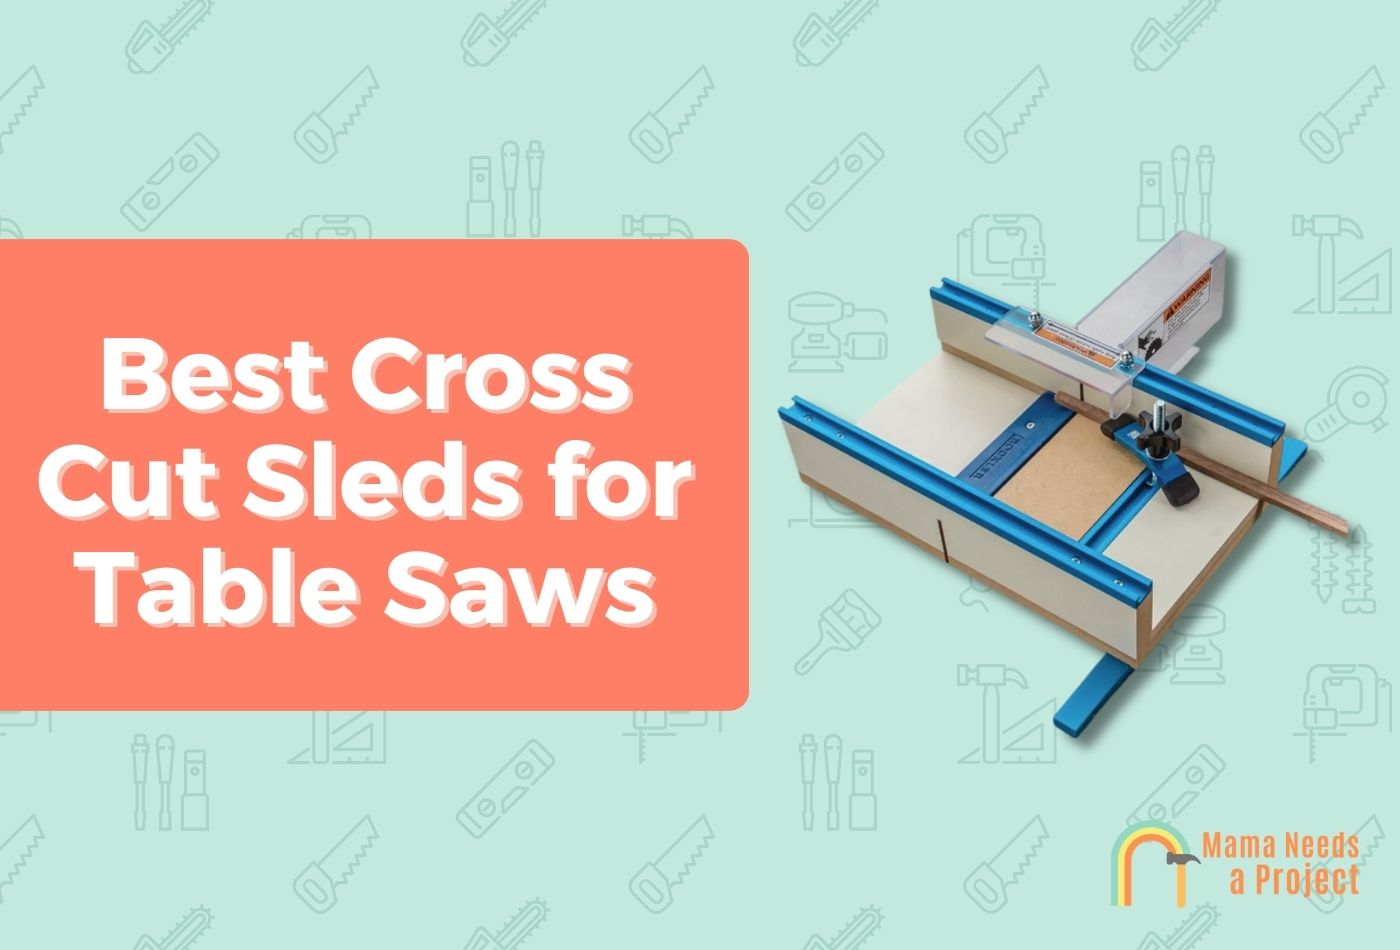 Best Cross Cut Sleds for Table Saws